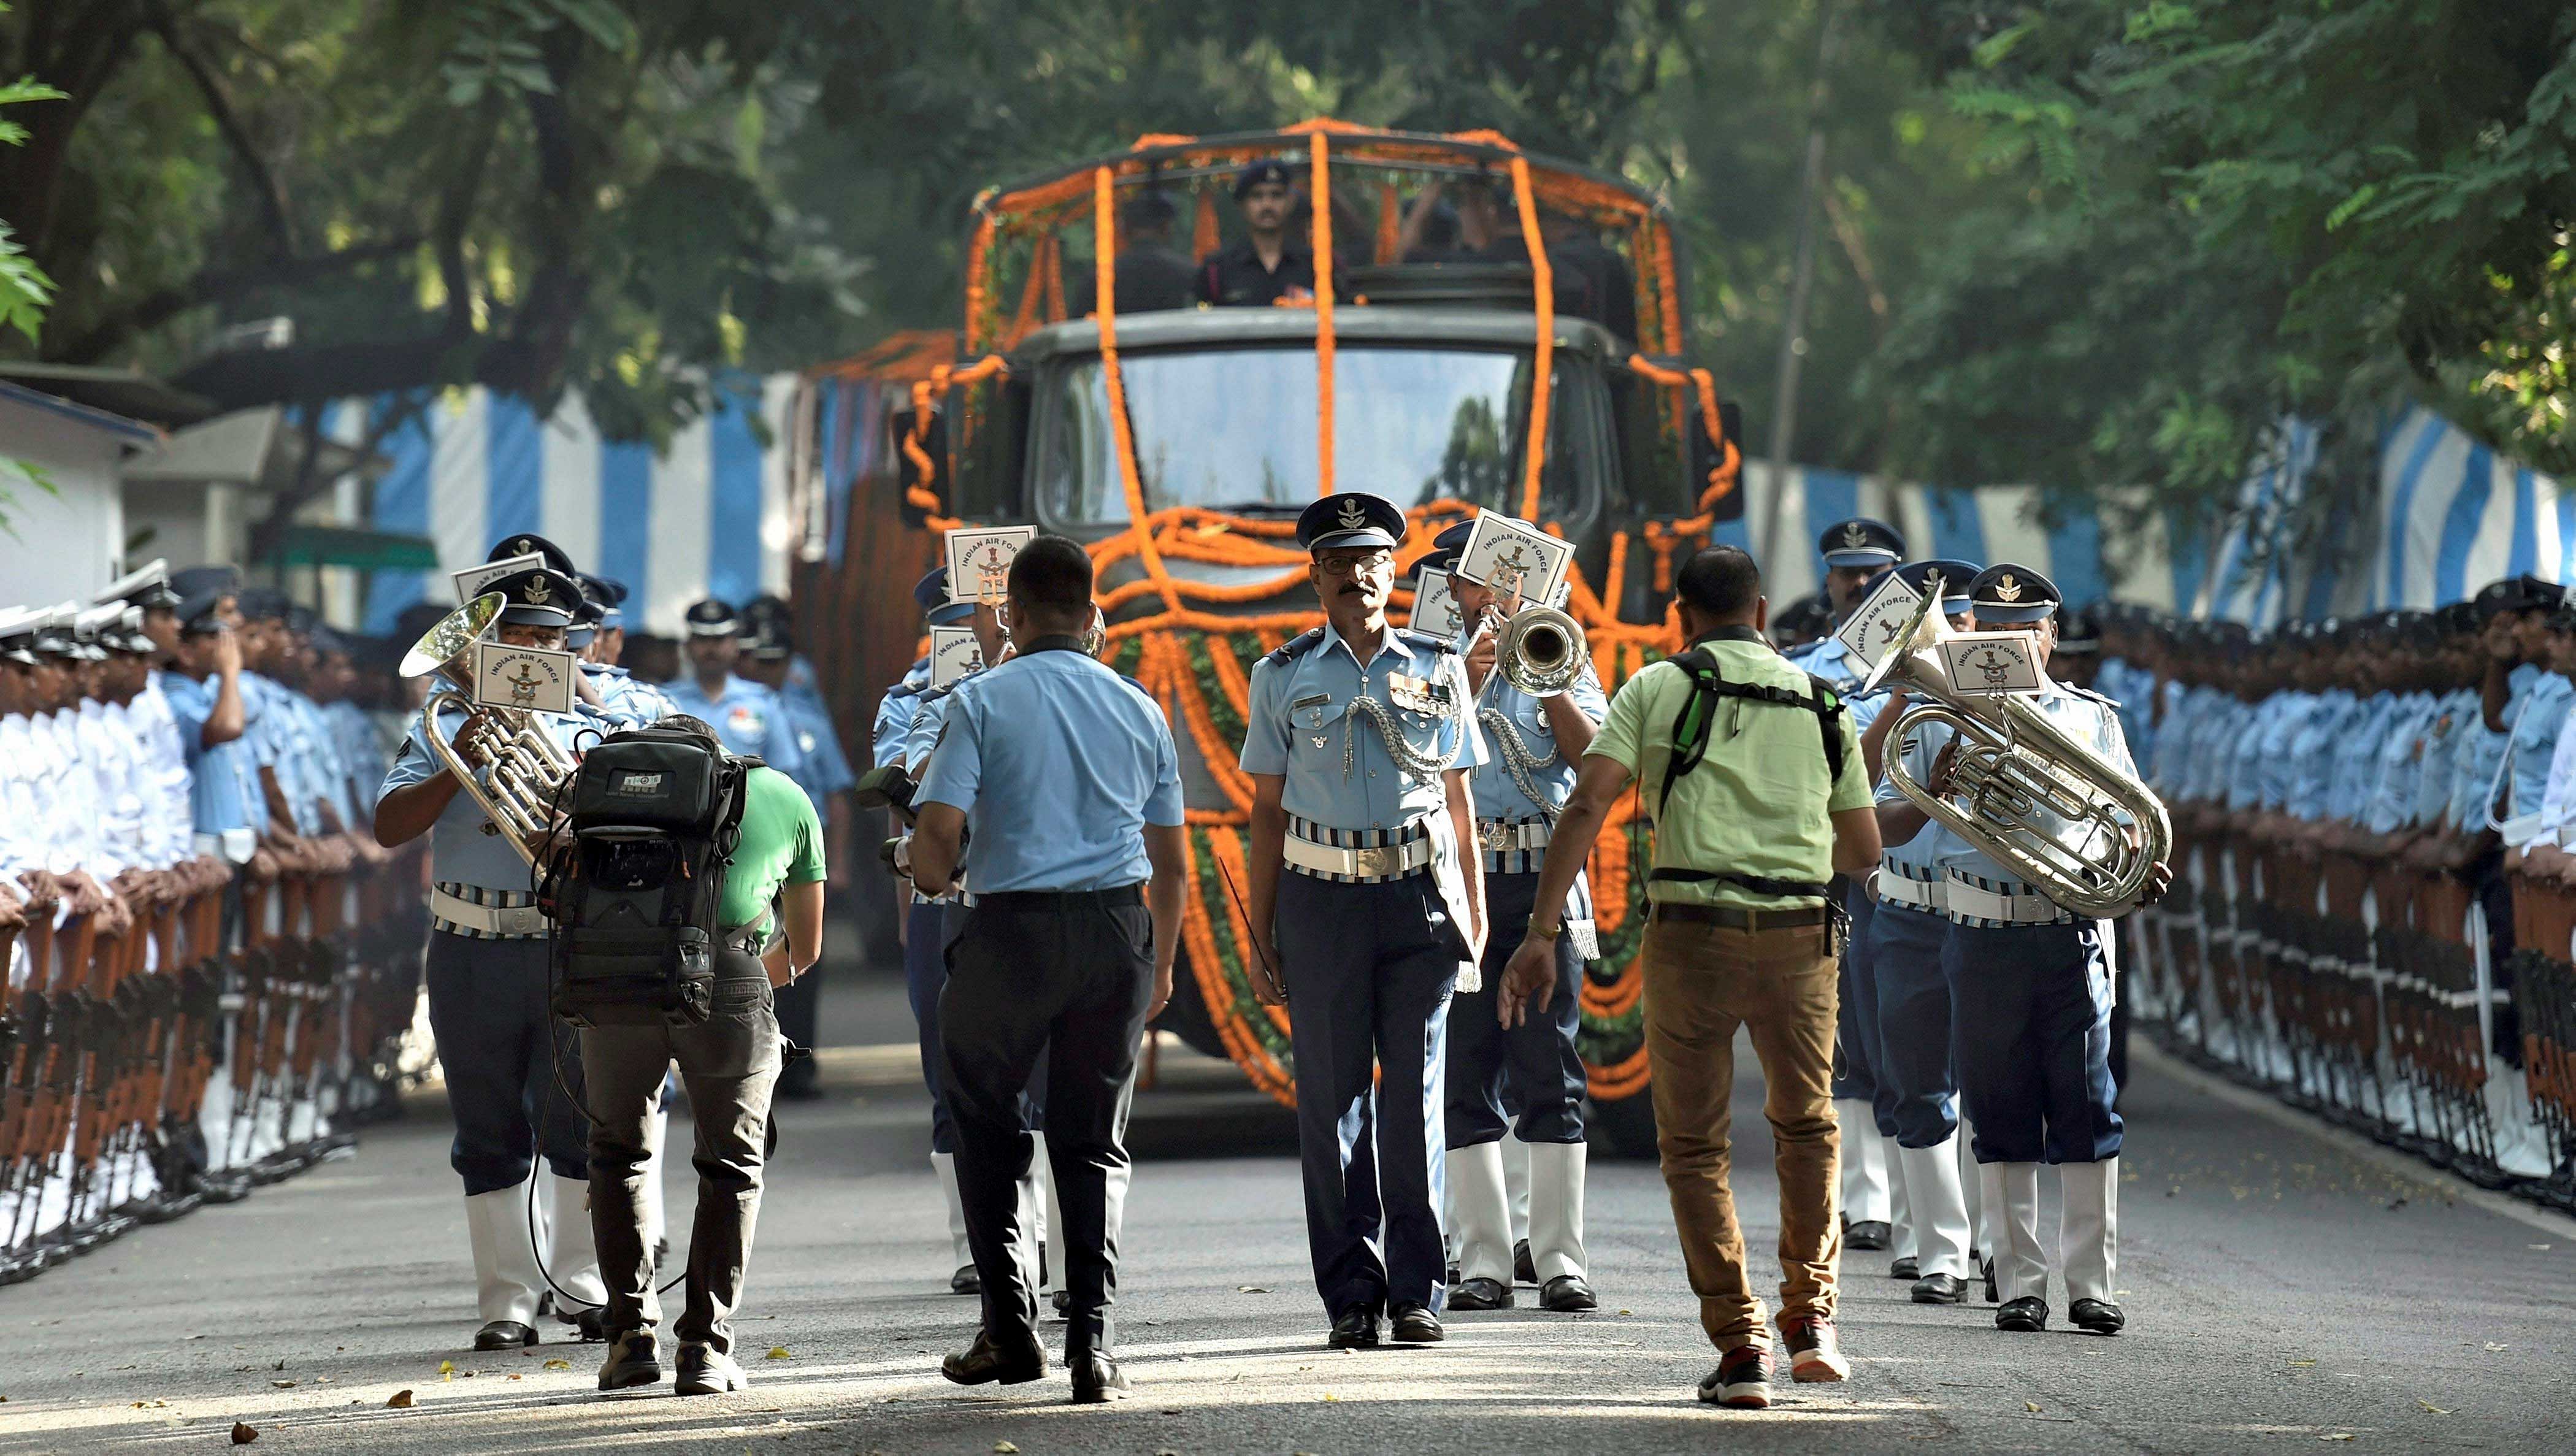 Defence personnel accompany the procession for the state funeral of Marshal of the Indian Air Force Arjan Singh in New Delhi on Monday. The final journey of the Marshal of the Indian Air Force Arjan Singh began today with the mortal remains being taken on a gun carriage to the Brar Square here for conducting last rites with state honours. PTI Photo